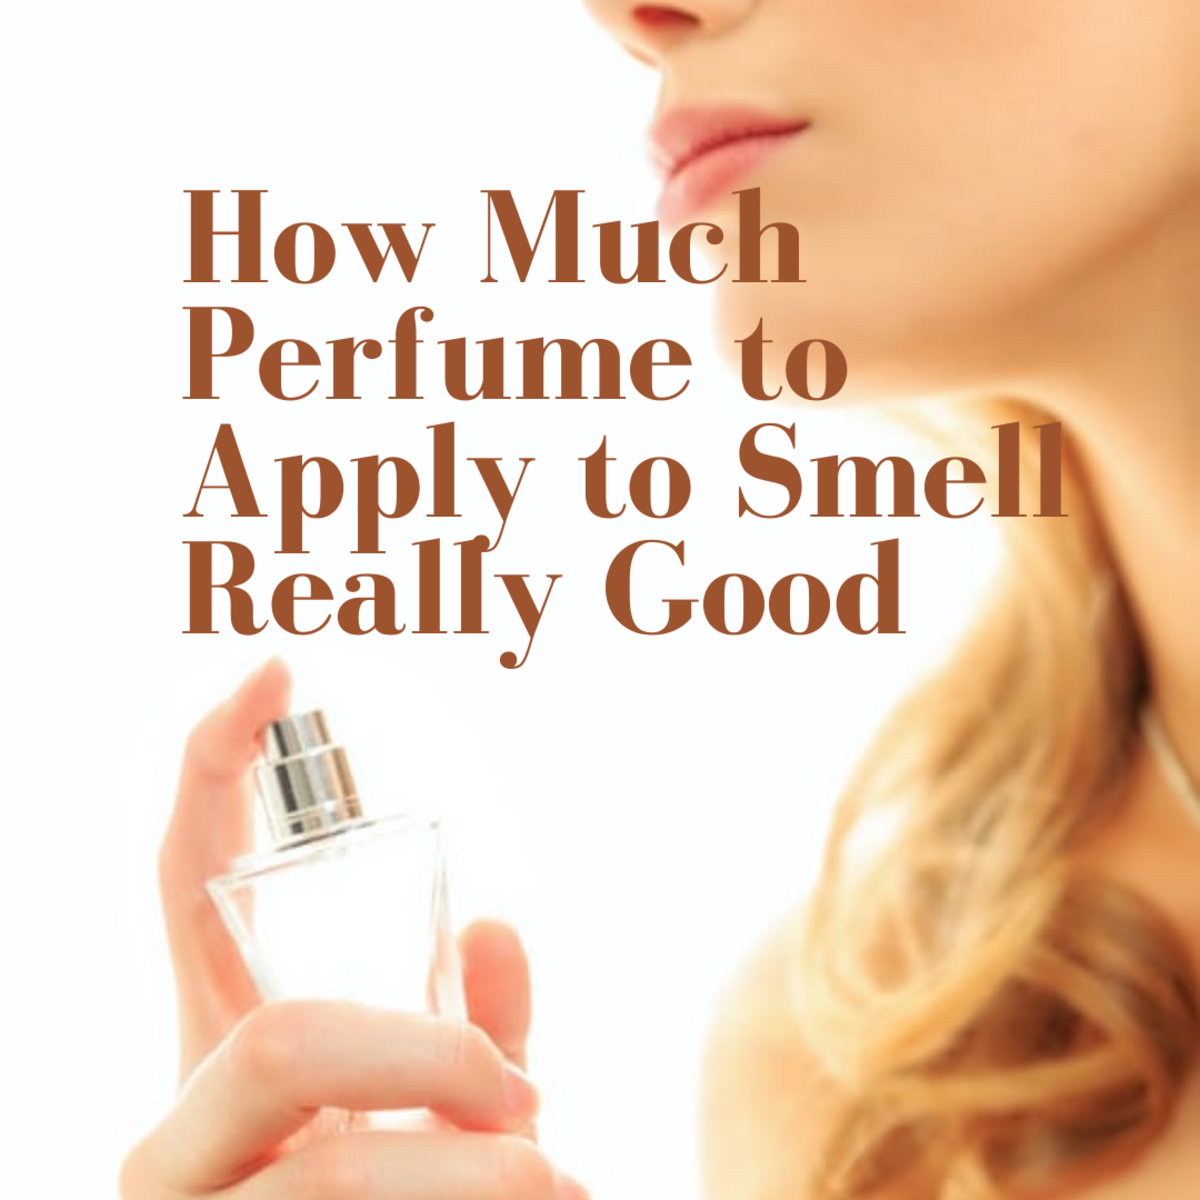 The Fragrance Etiquette - Smelling Good Just Right